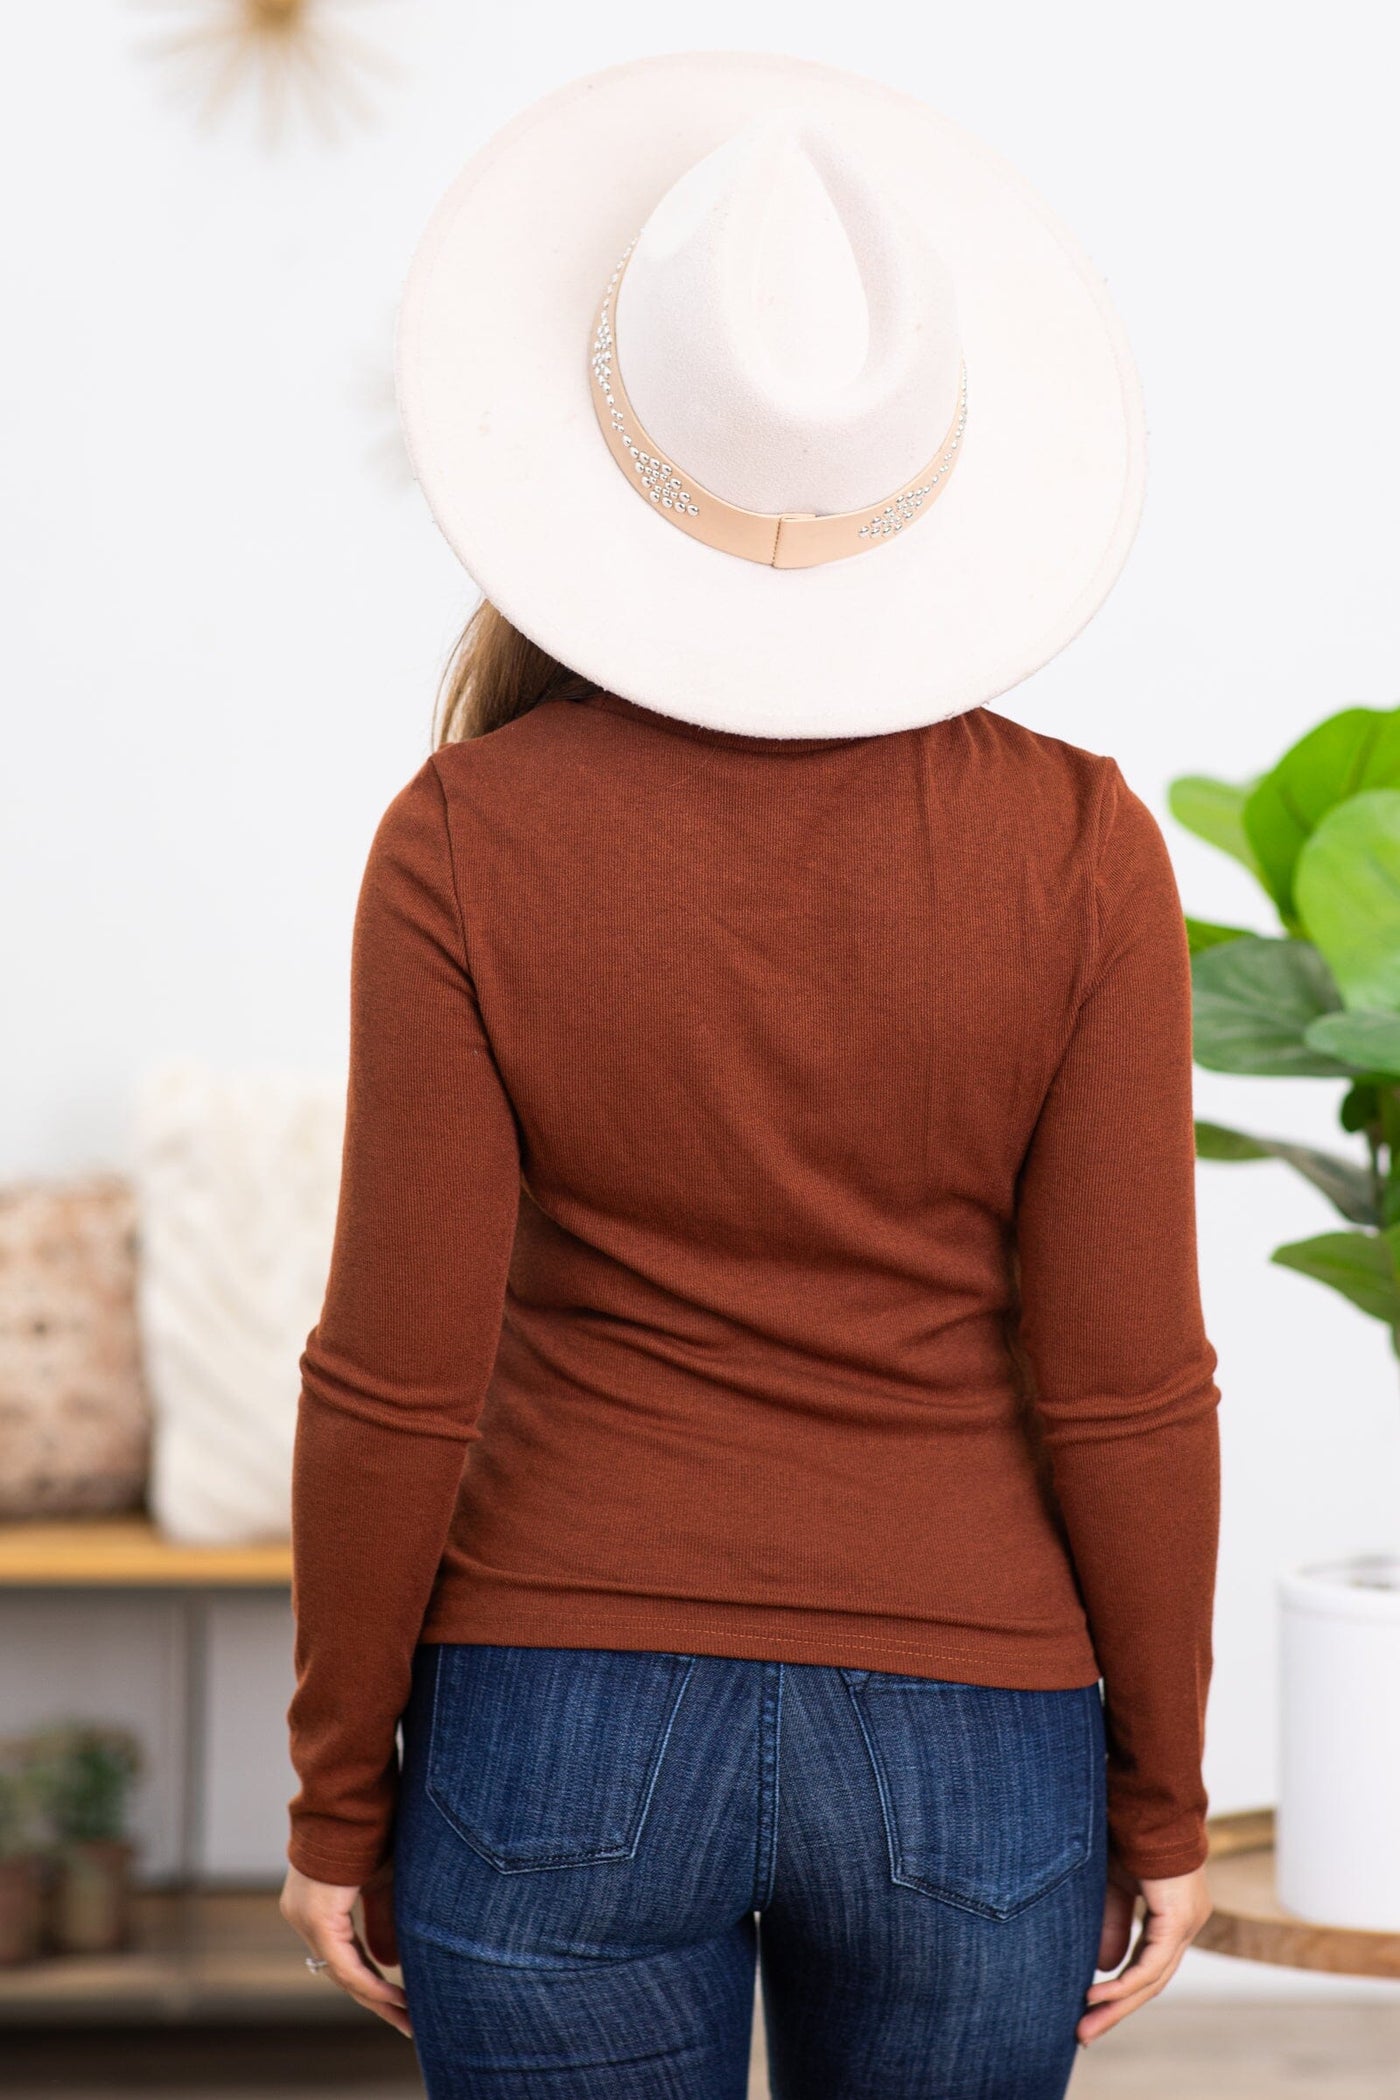 Cognac Long Sleeve Top With Cutout Detail - Filly Flair